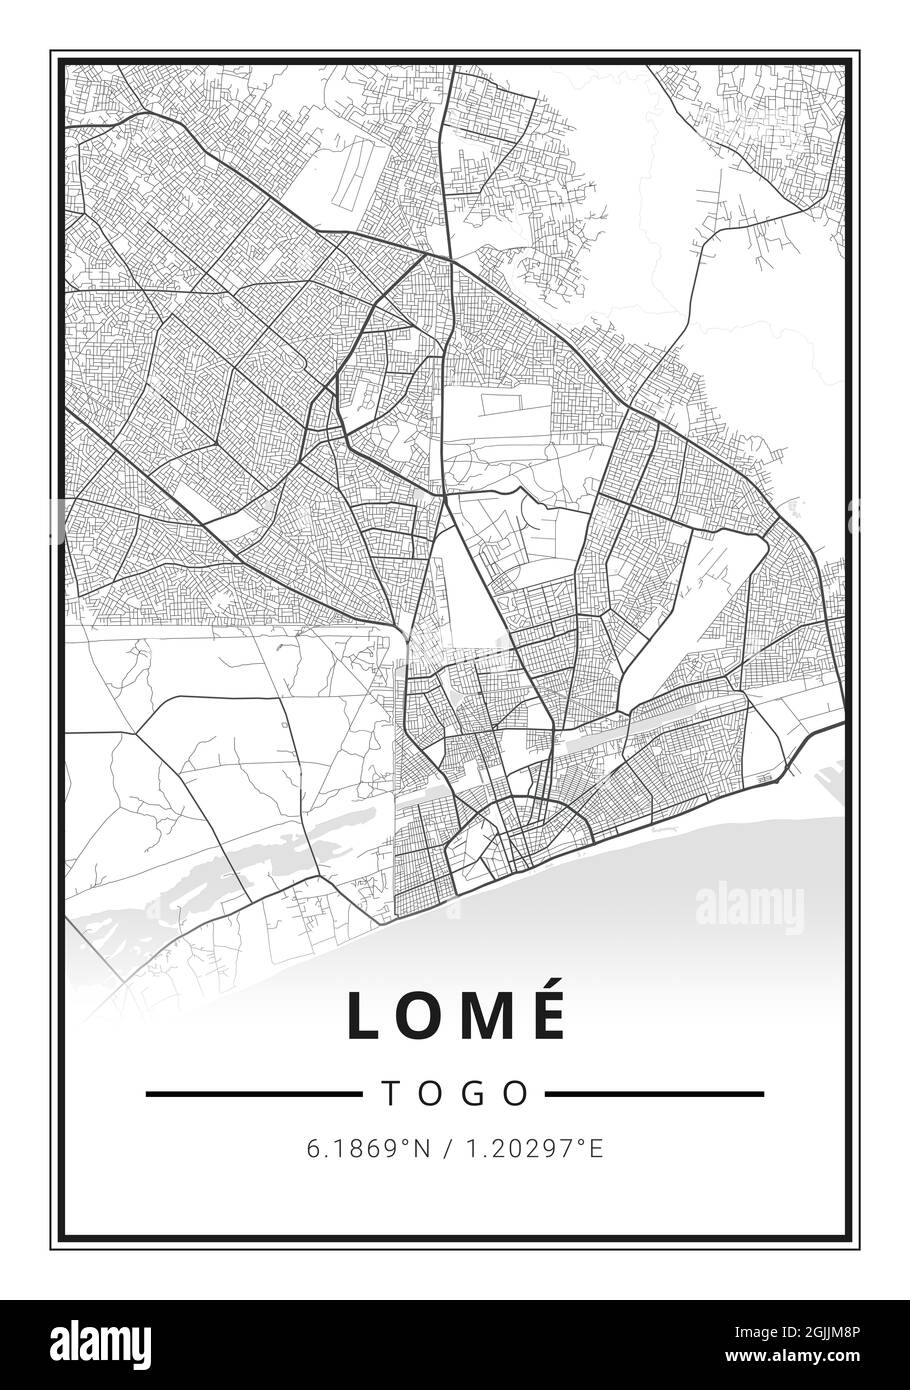 Street map art of Lomé city in Togo - Africa Stock Photo